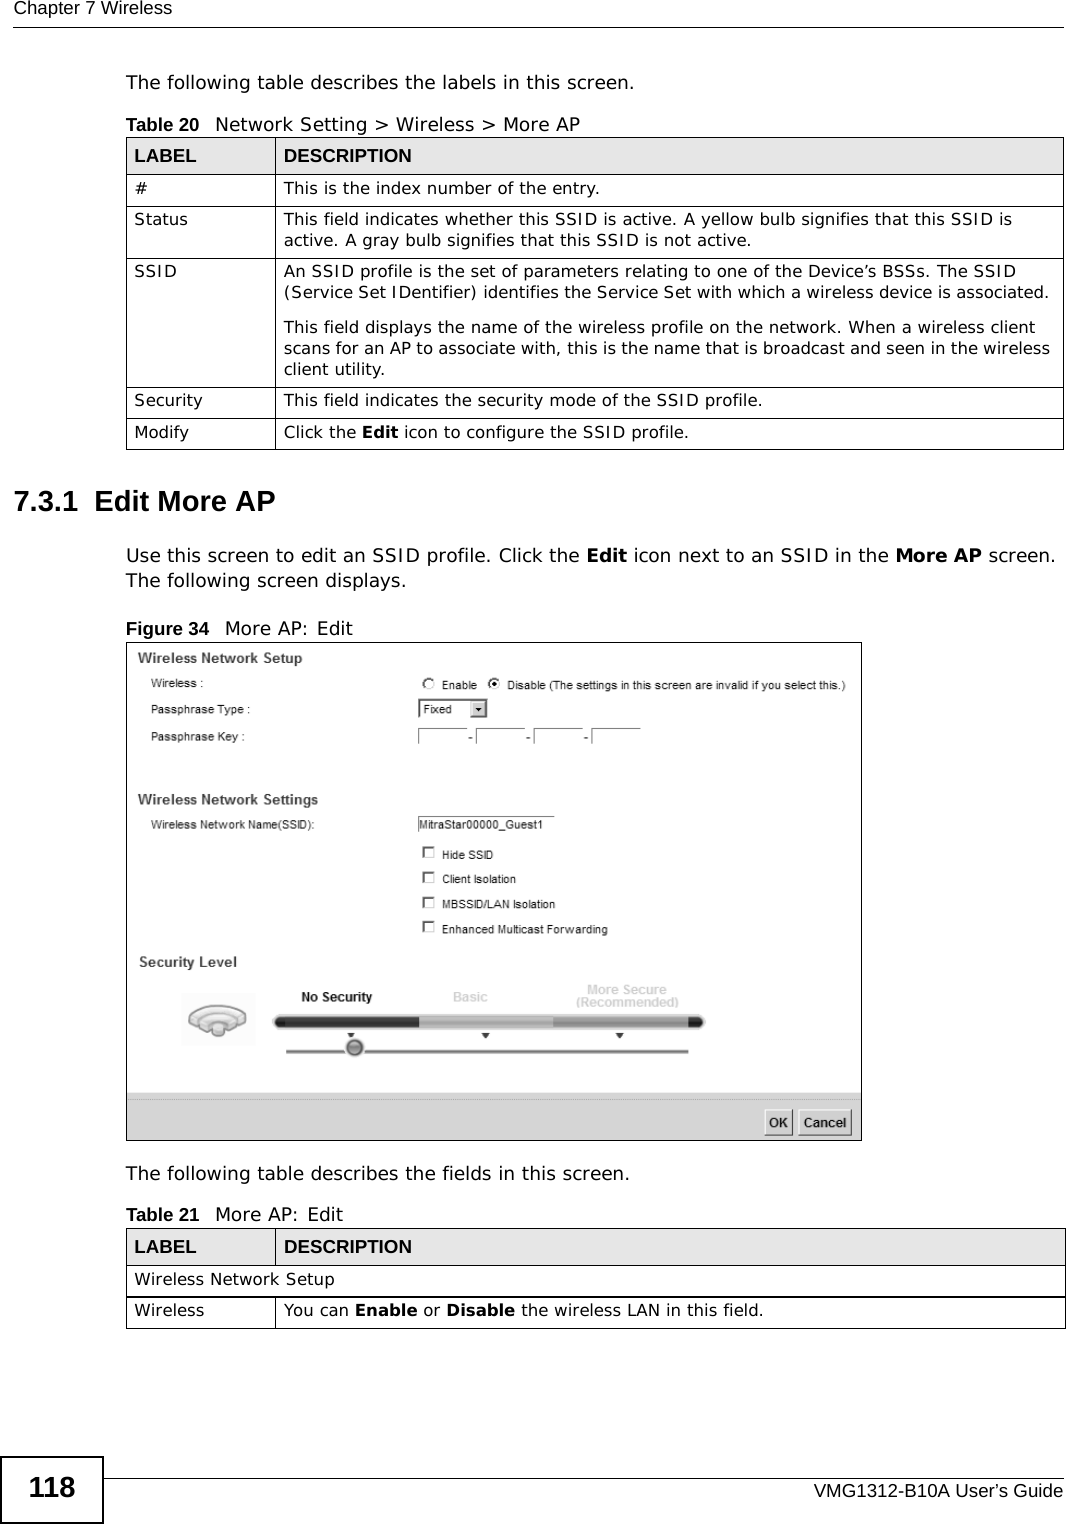 Chapter 7 WirelessVMG1312-B10A User’s Guide118The following table describes the labels in this screen.7.3.1  Edit More AP Use this screen to edit an SSID profile. Click the Edit icon next to an SSID in the More AP screen. The following screen displays.Figure 34   More AP: EditThe following table describes the fields in this screen.Table 20   Network Setting &gt; Wireless &gt; More APLABEL DESCRIPTION# This is the index number of the entry. Status This field indicates whether this SSID is active. A yellow bulb signifies that this SSID is active. A gray bulb signifies that this SSID is not active.SSID An SSID profile is the set of parameters relating to one of the Device’s BSSs. The SSID (Service Set IDentifier) identifies the Service Set with which a wireless device is associated. This field displays the name of the wireless profile on the network. When a wireless client scans for an AP to associate with, this is the name that is broadcast and seen in the wireless client utility.Security This field indicates the security mode of the SSID profile.Modify Click the Edit icon to configure the SSID profile.Table 21   More AP: EditLABEL DESCRIPTIONWireless Network SetupWireless You can Enable or Disable the wireless LAN in this field.